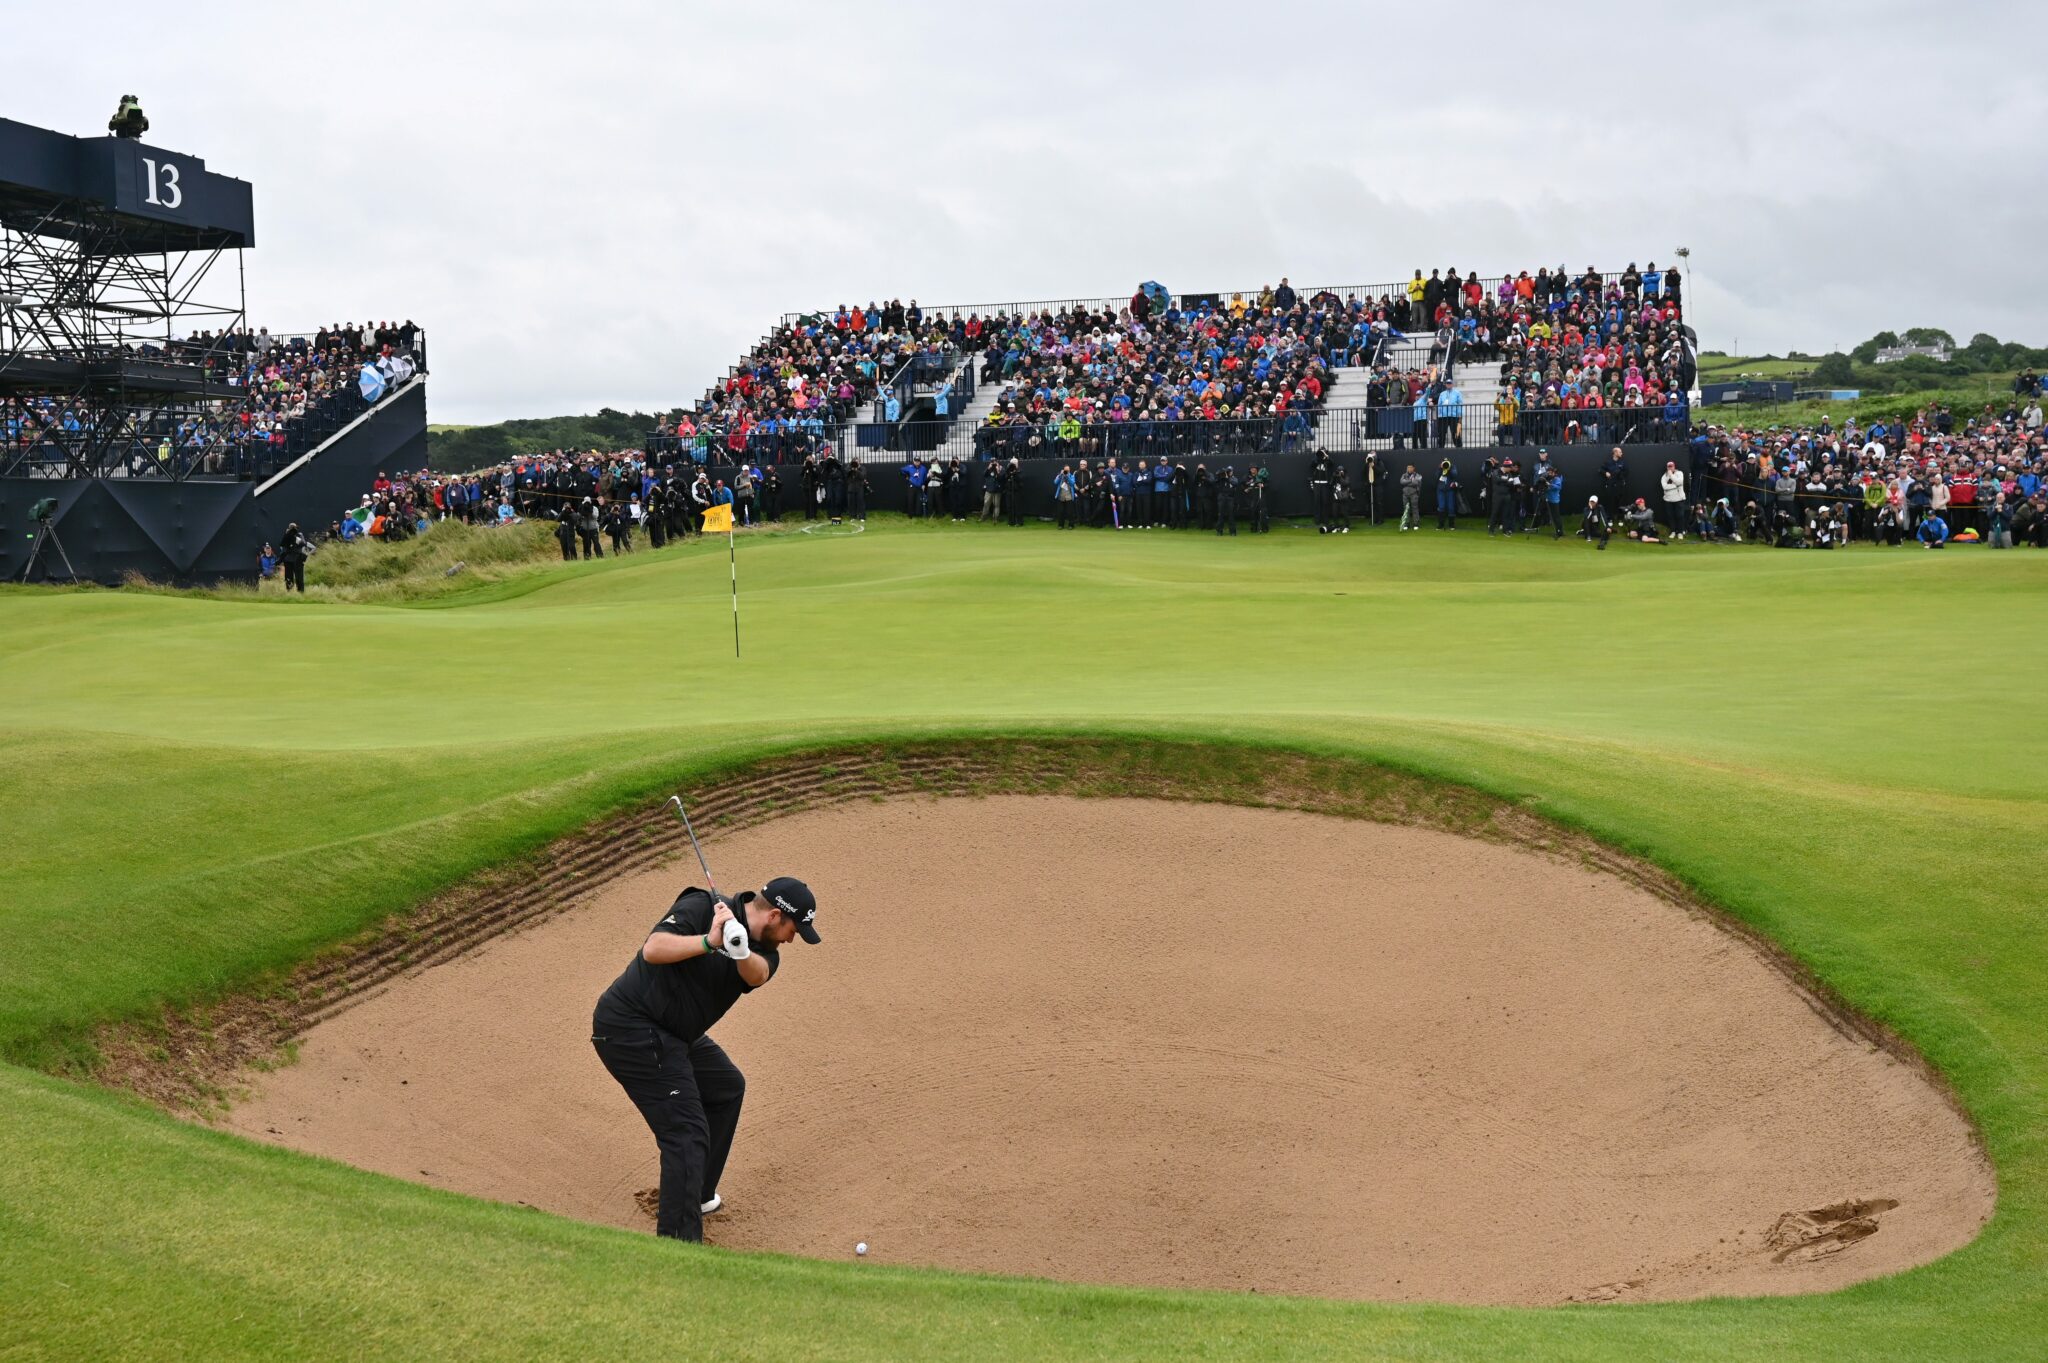 Golfer at The Open taking position on the course before play infront of a large crowd